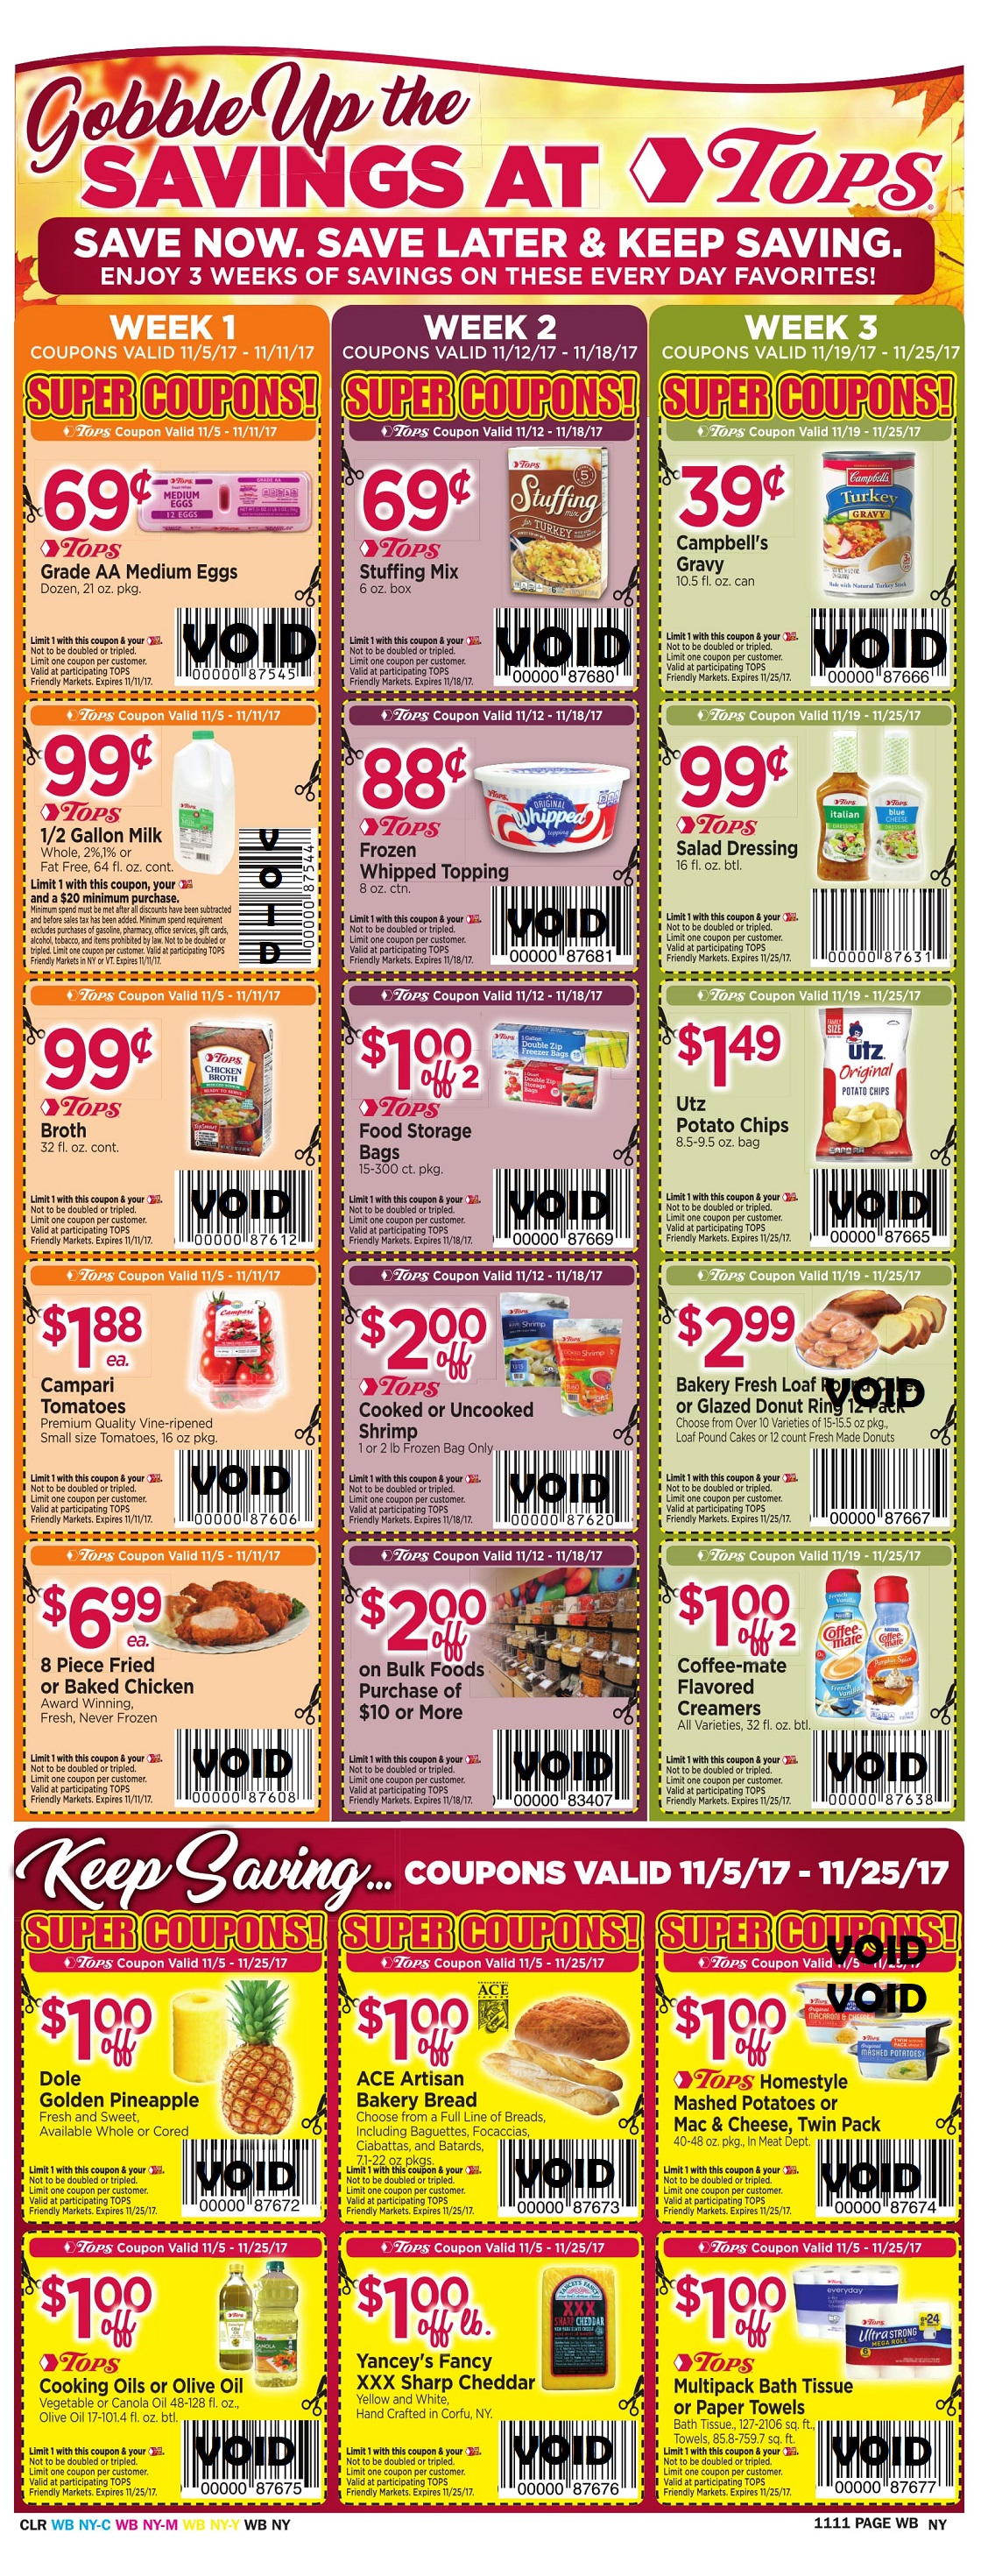 Tops Markets Ad Scan Week 11 5 Christmas Coupons